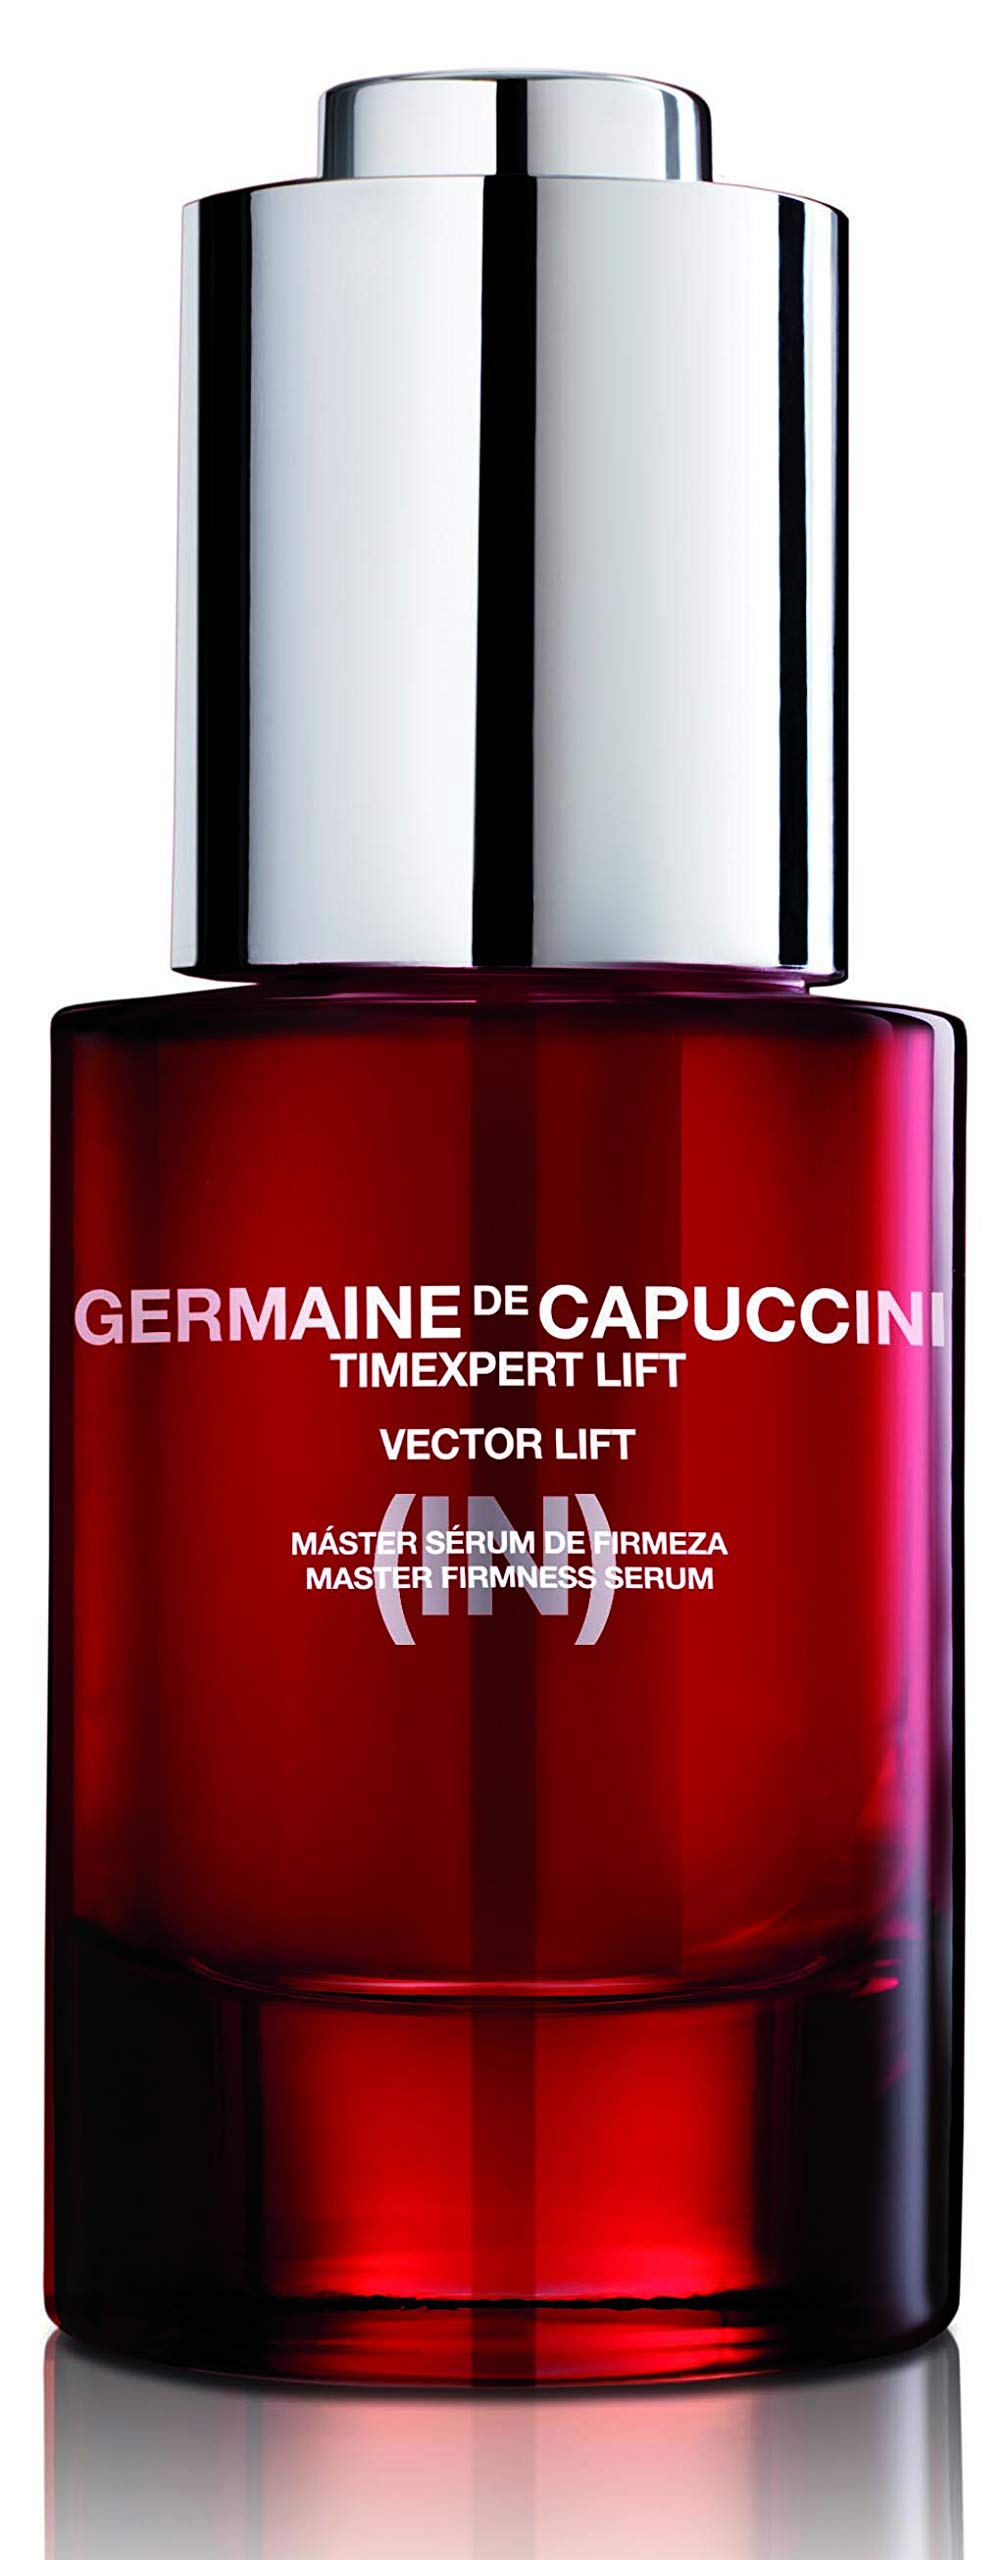 GERMAINE DE CAPUCCINI - Timexpert Lift (IN) |Vector Lift Master Firmness Serum | Anti-Aging Serum to Fill-in, Lift and Reduce Wr